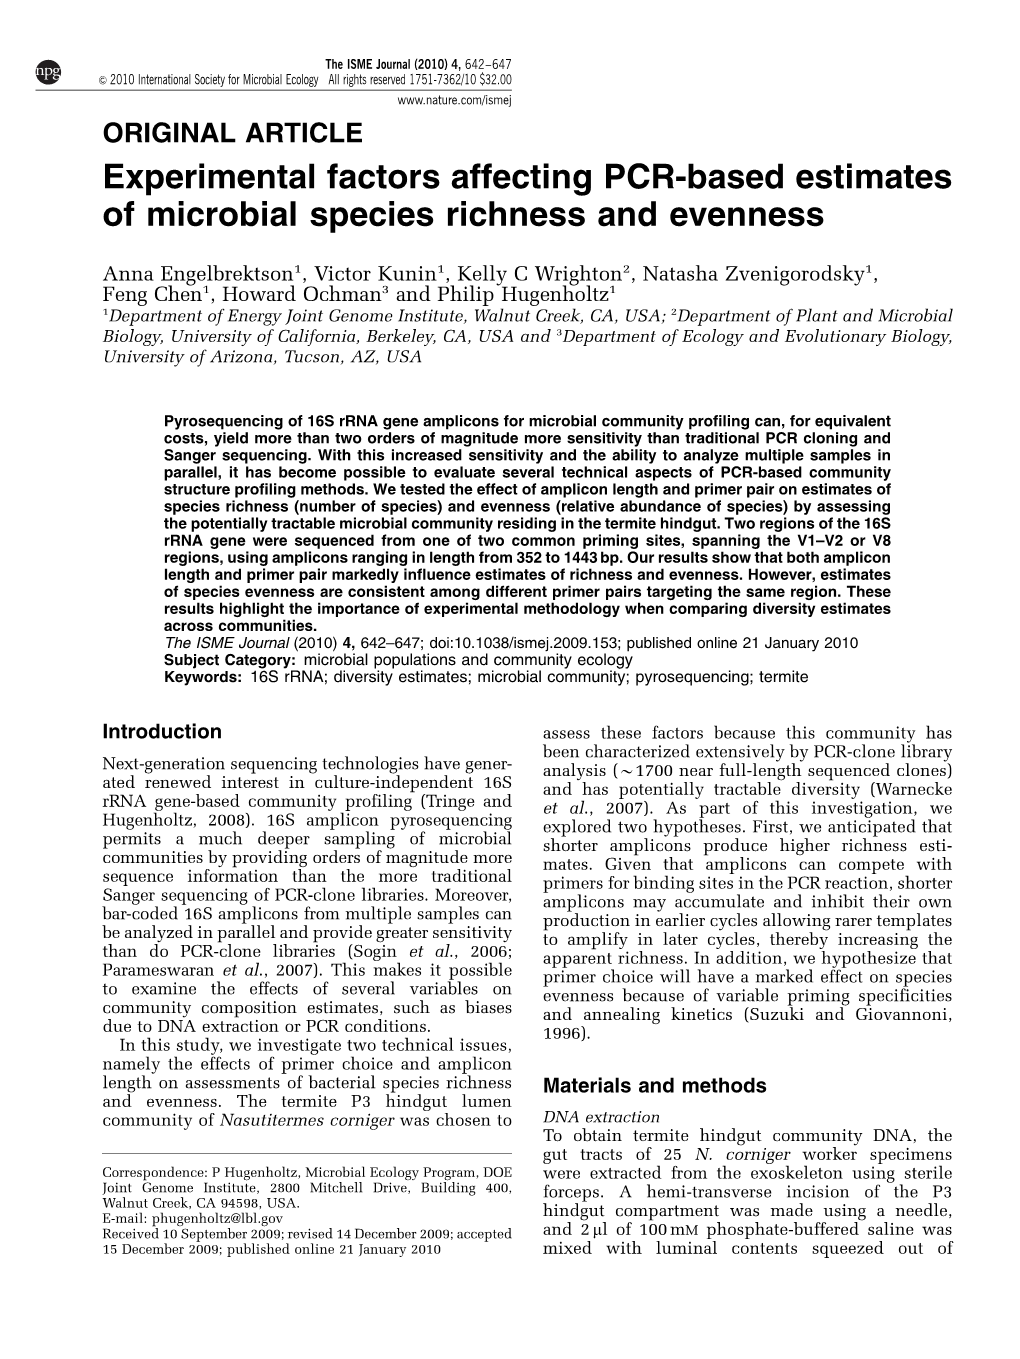 Experimental Factors Affecting PCR-Based Estimates of Microbial Species Richness and Evenness